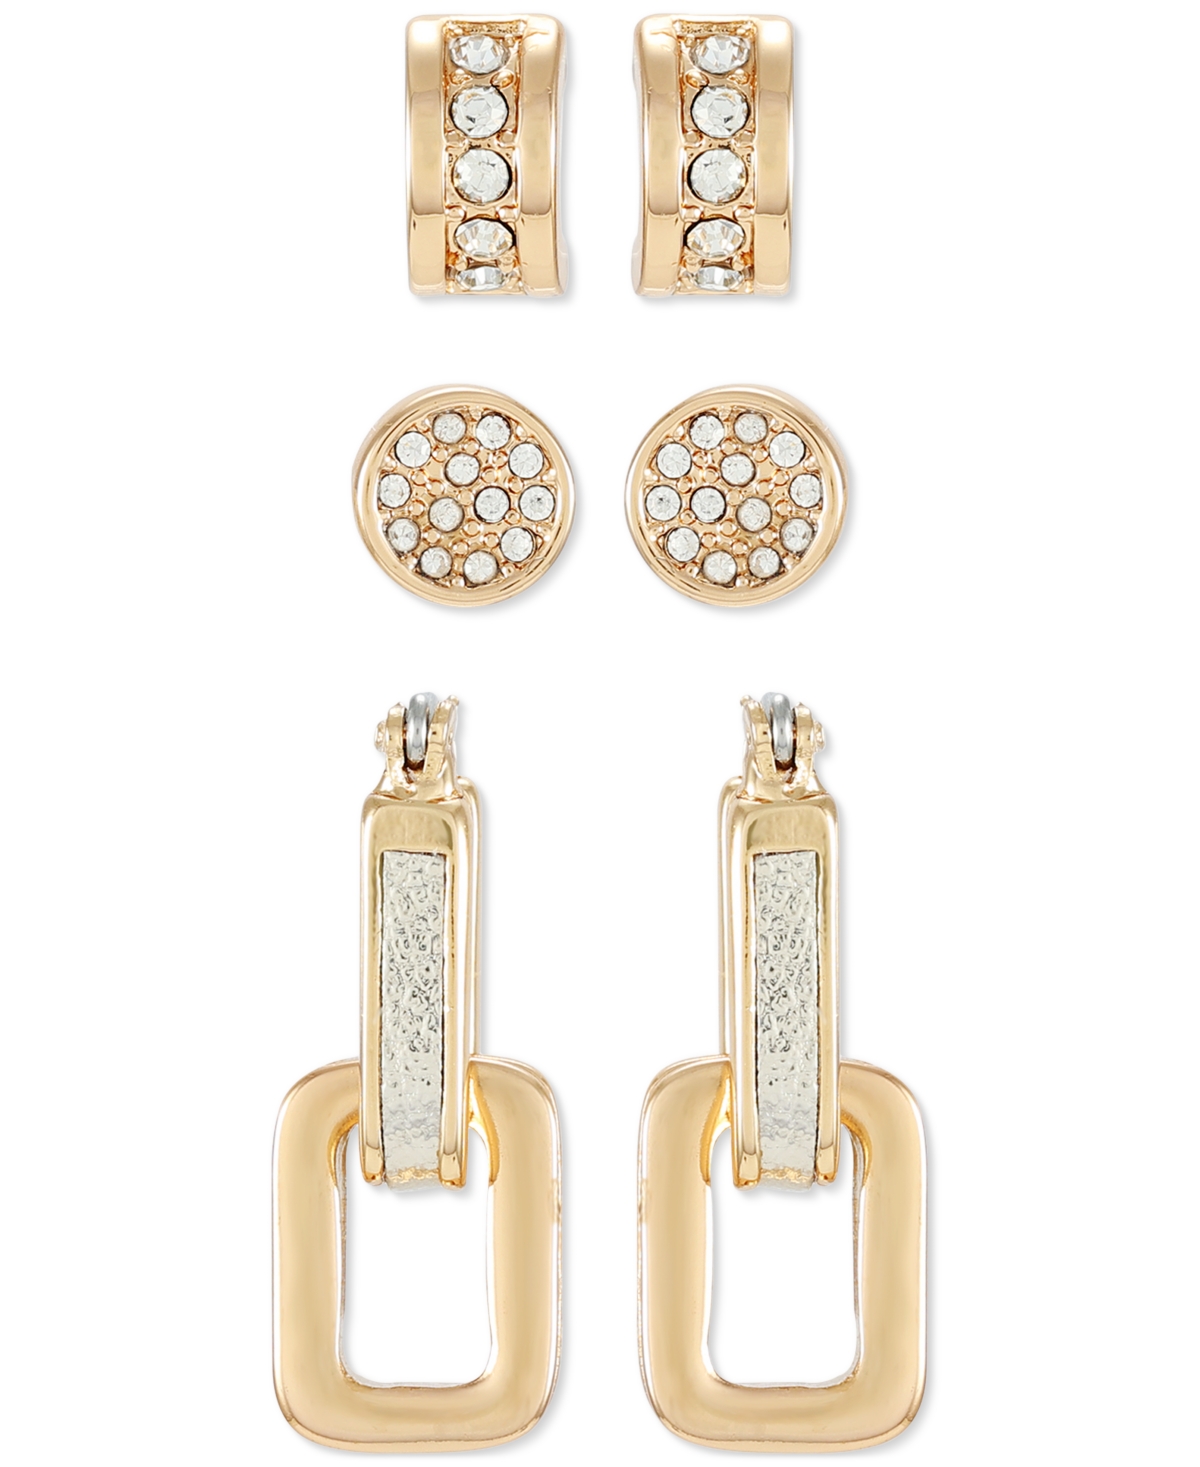 Guess Gold-tone 3-pc. Set Crystal Earrings In Gold  Champagne Trio Earring Set